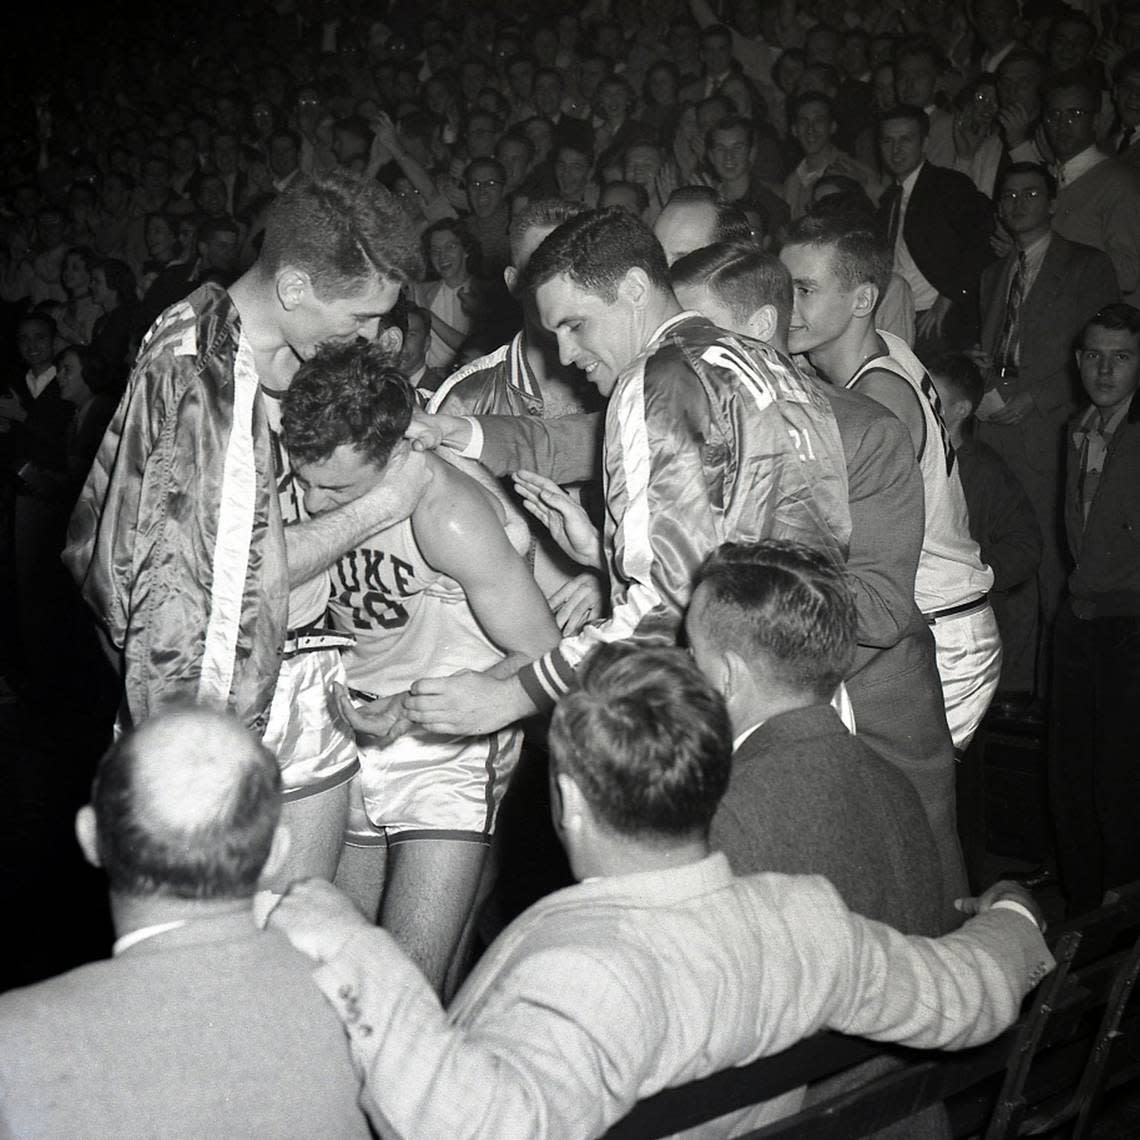 Dick Groat receives congratulations after breaking Duke’s scoring record, by scoring 48 points against North Carolina on February 29, 1952.